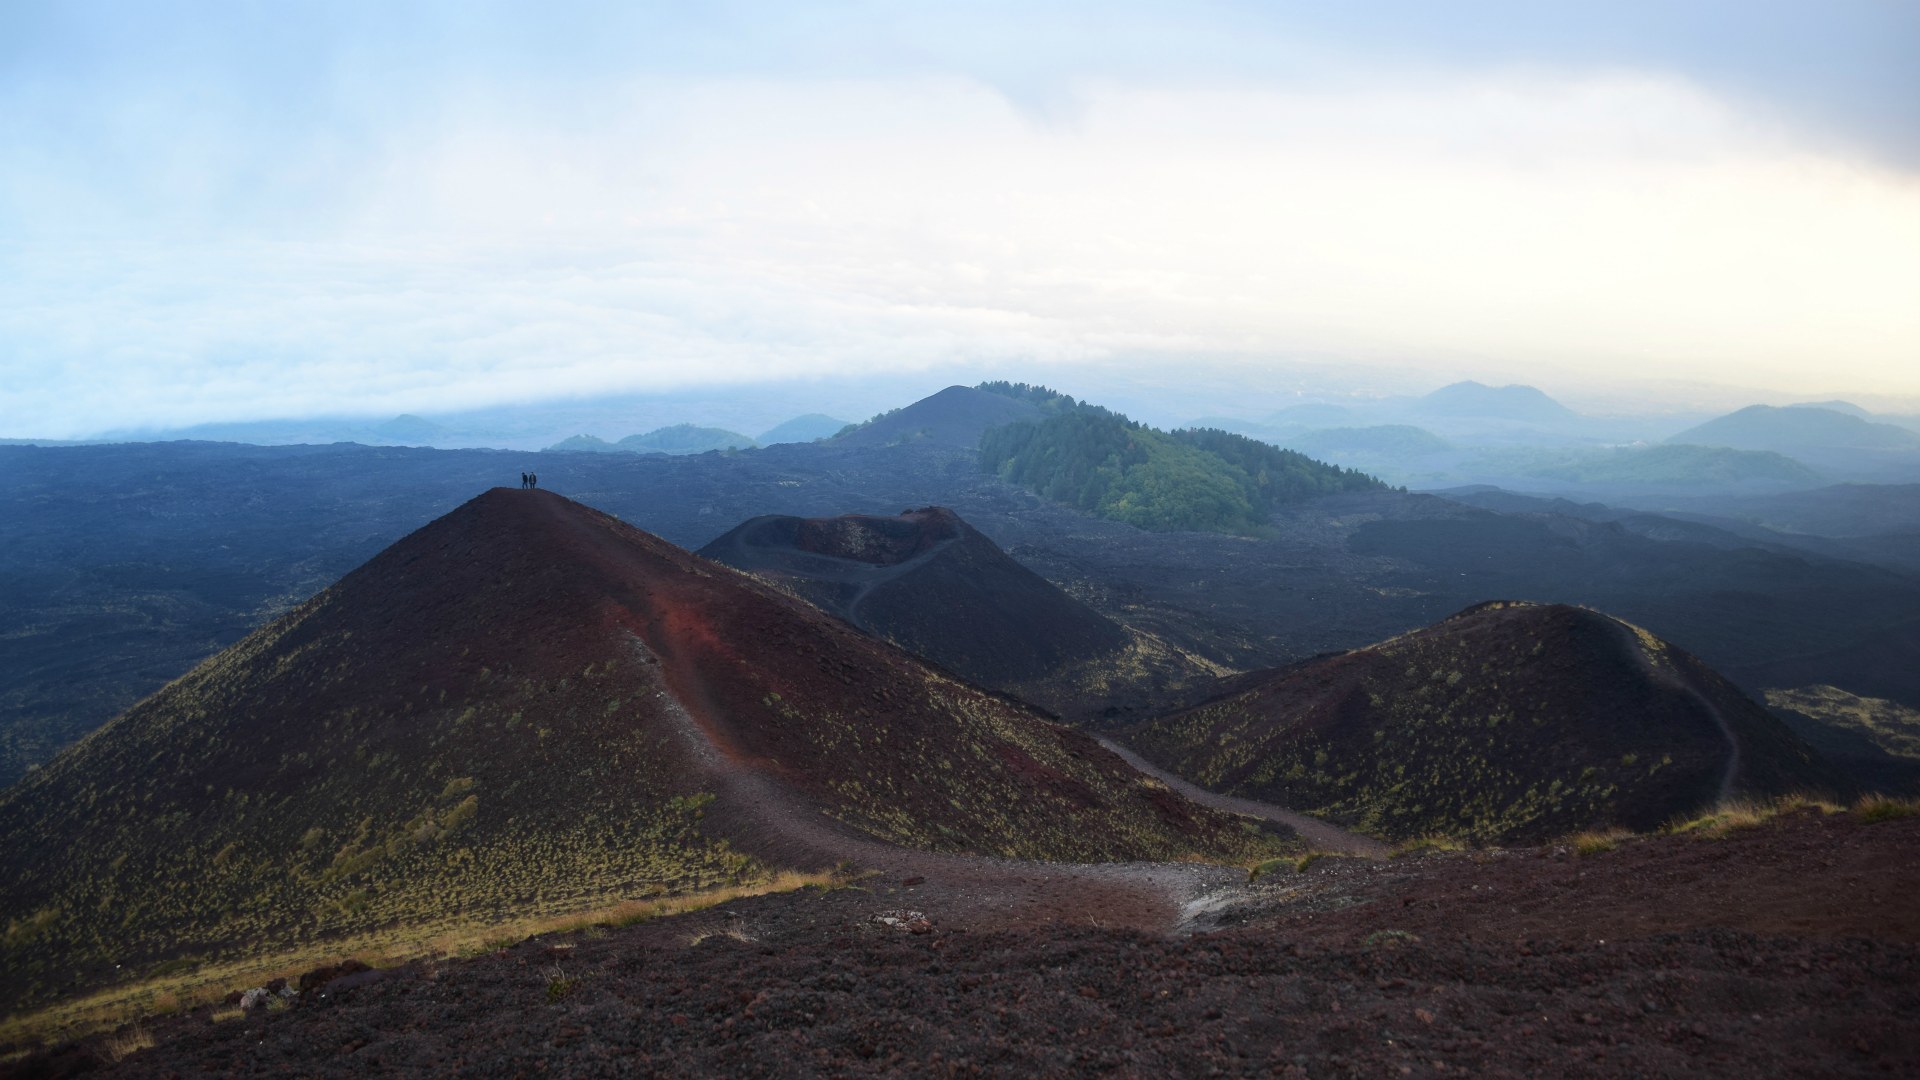 View from Silvestri Craters, Etna, Sicily